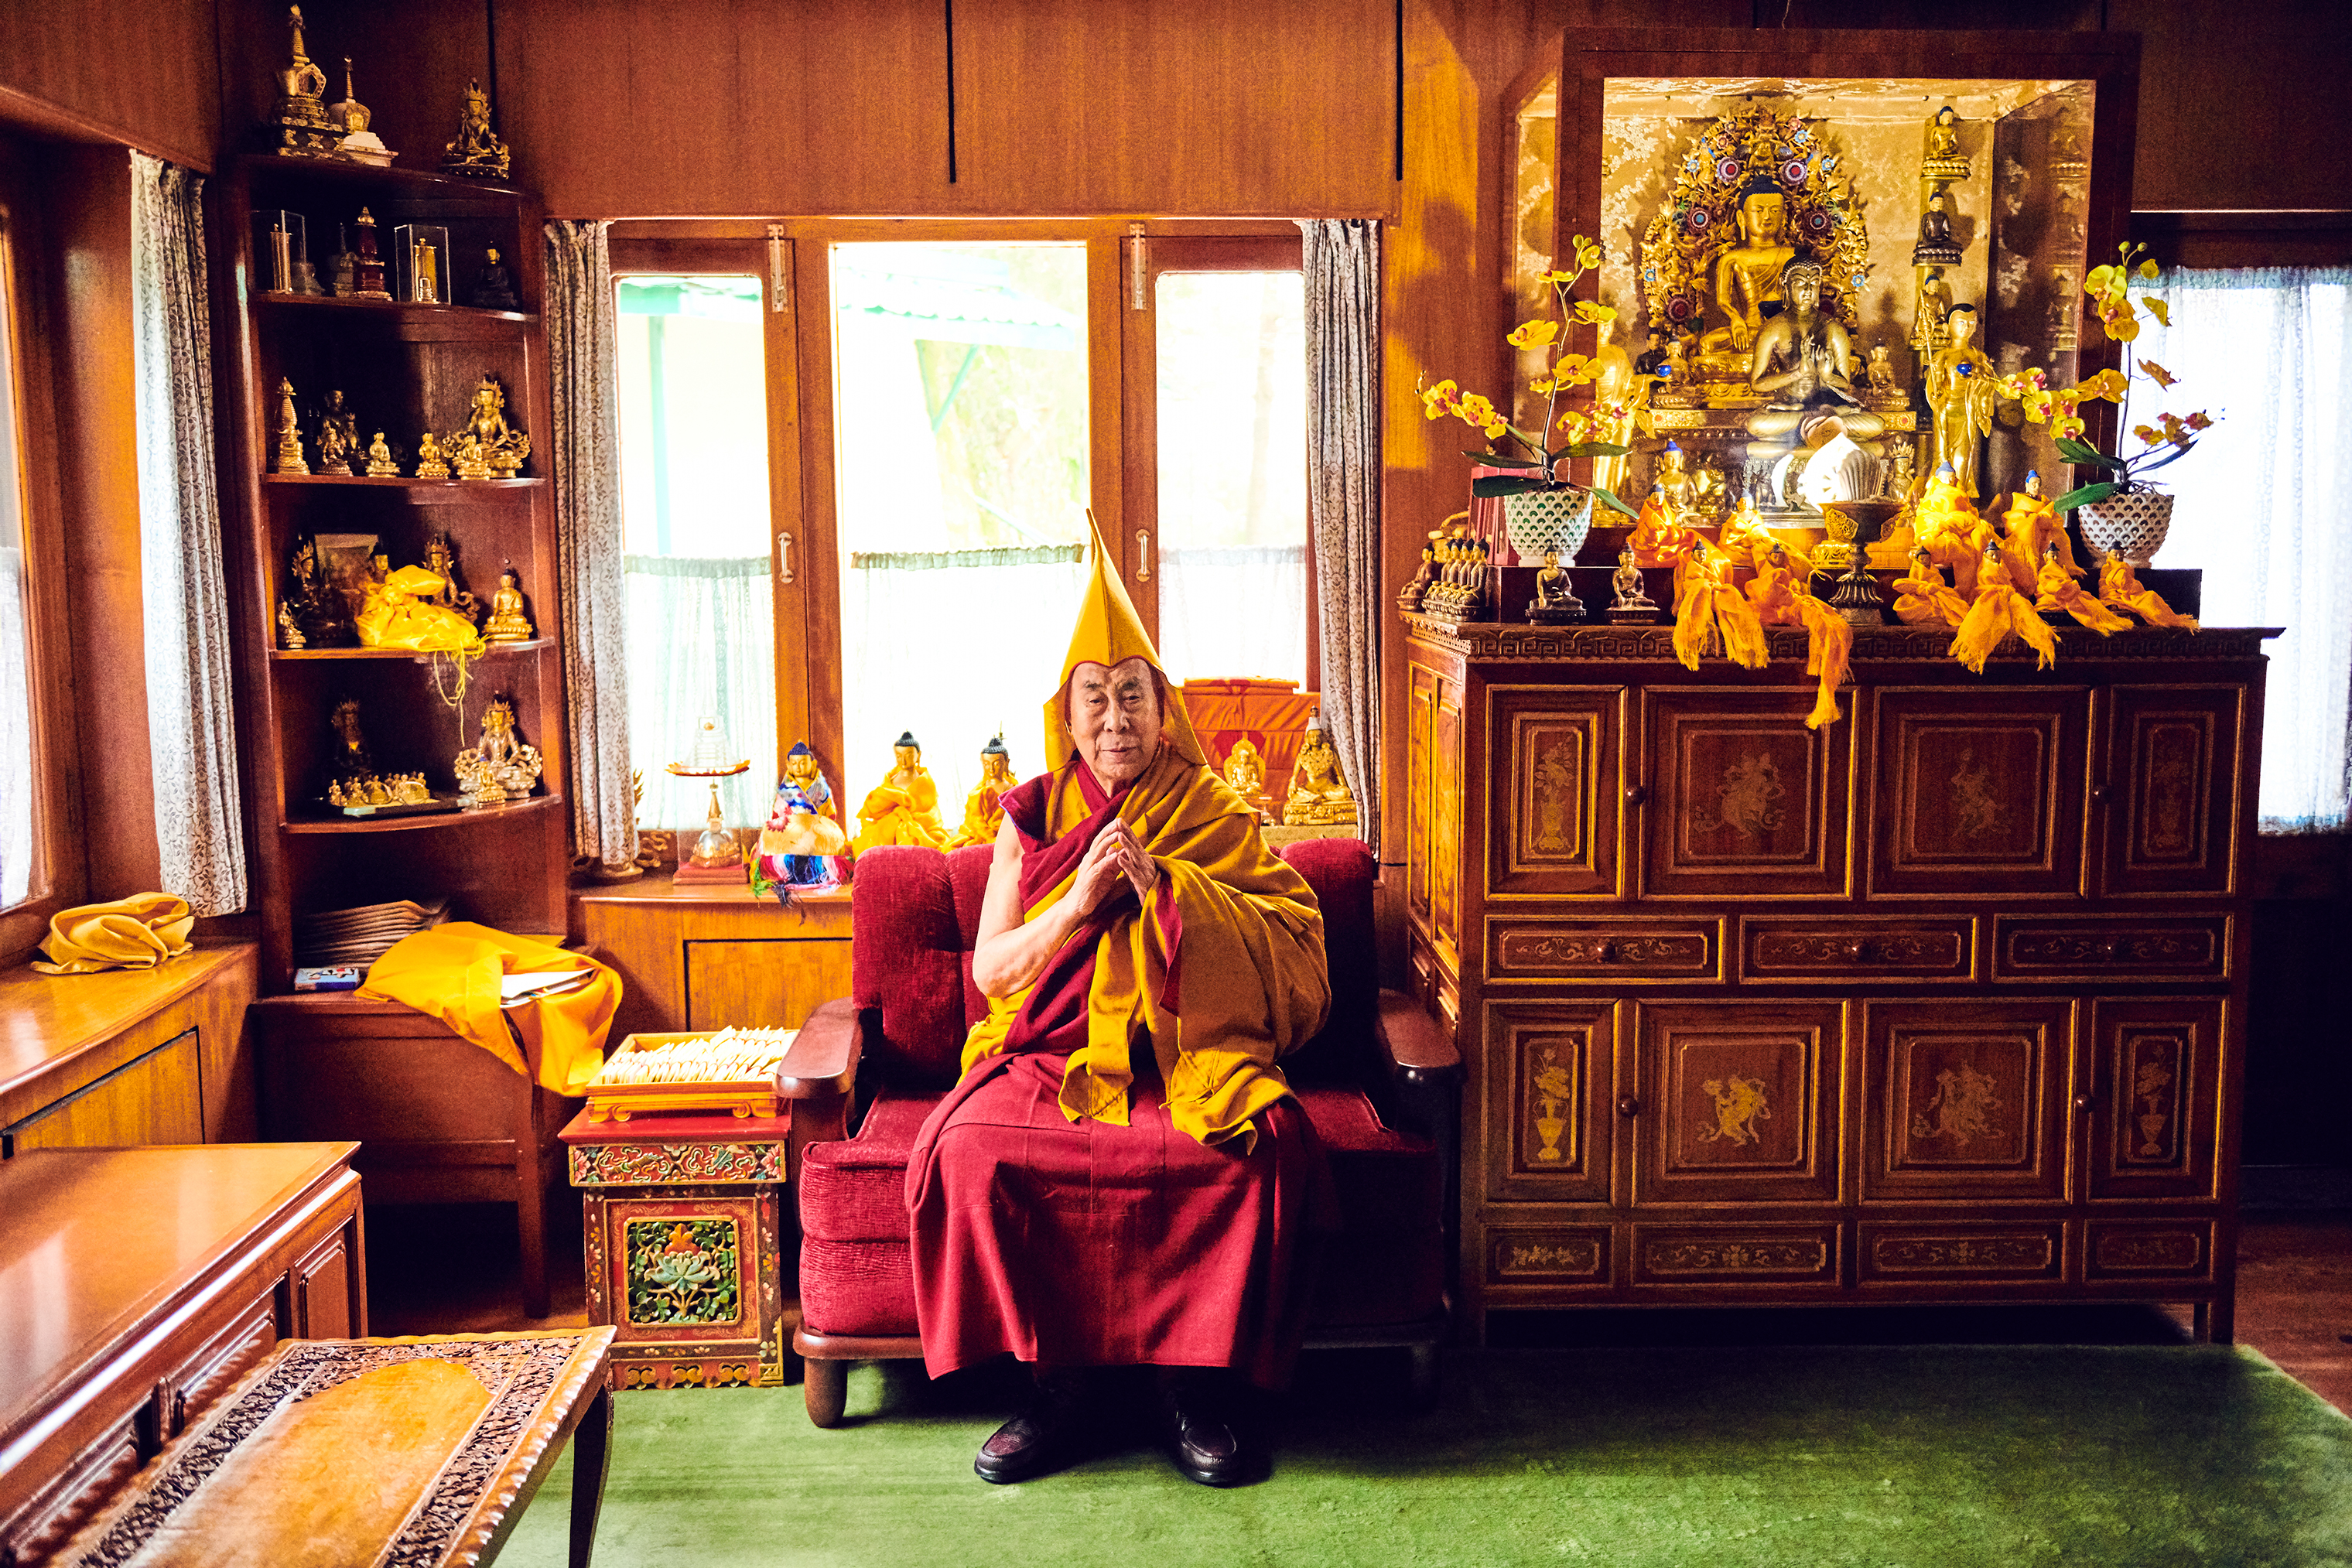 The Dalai Lama in Dharamsala in February, 2019. (Ruven Afanador for TIME)